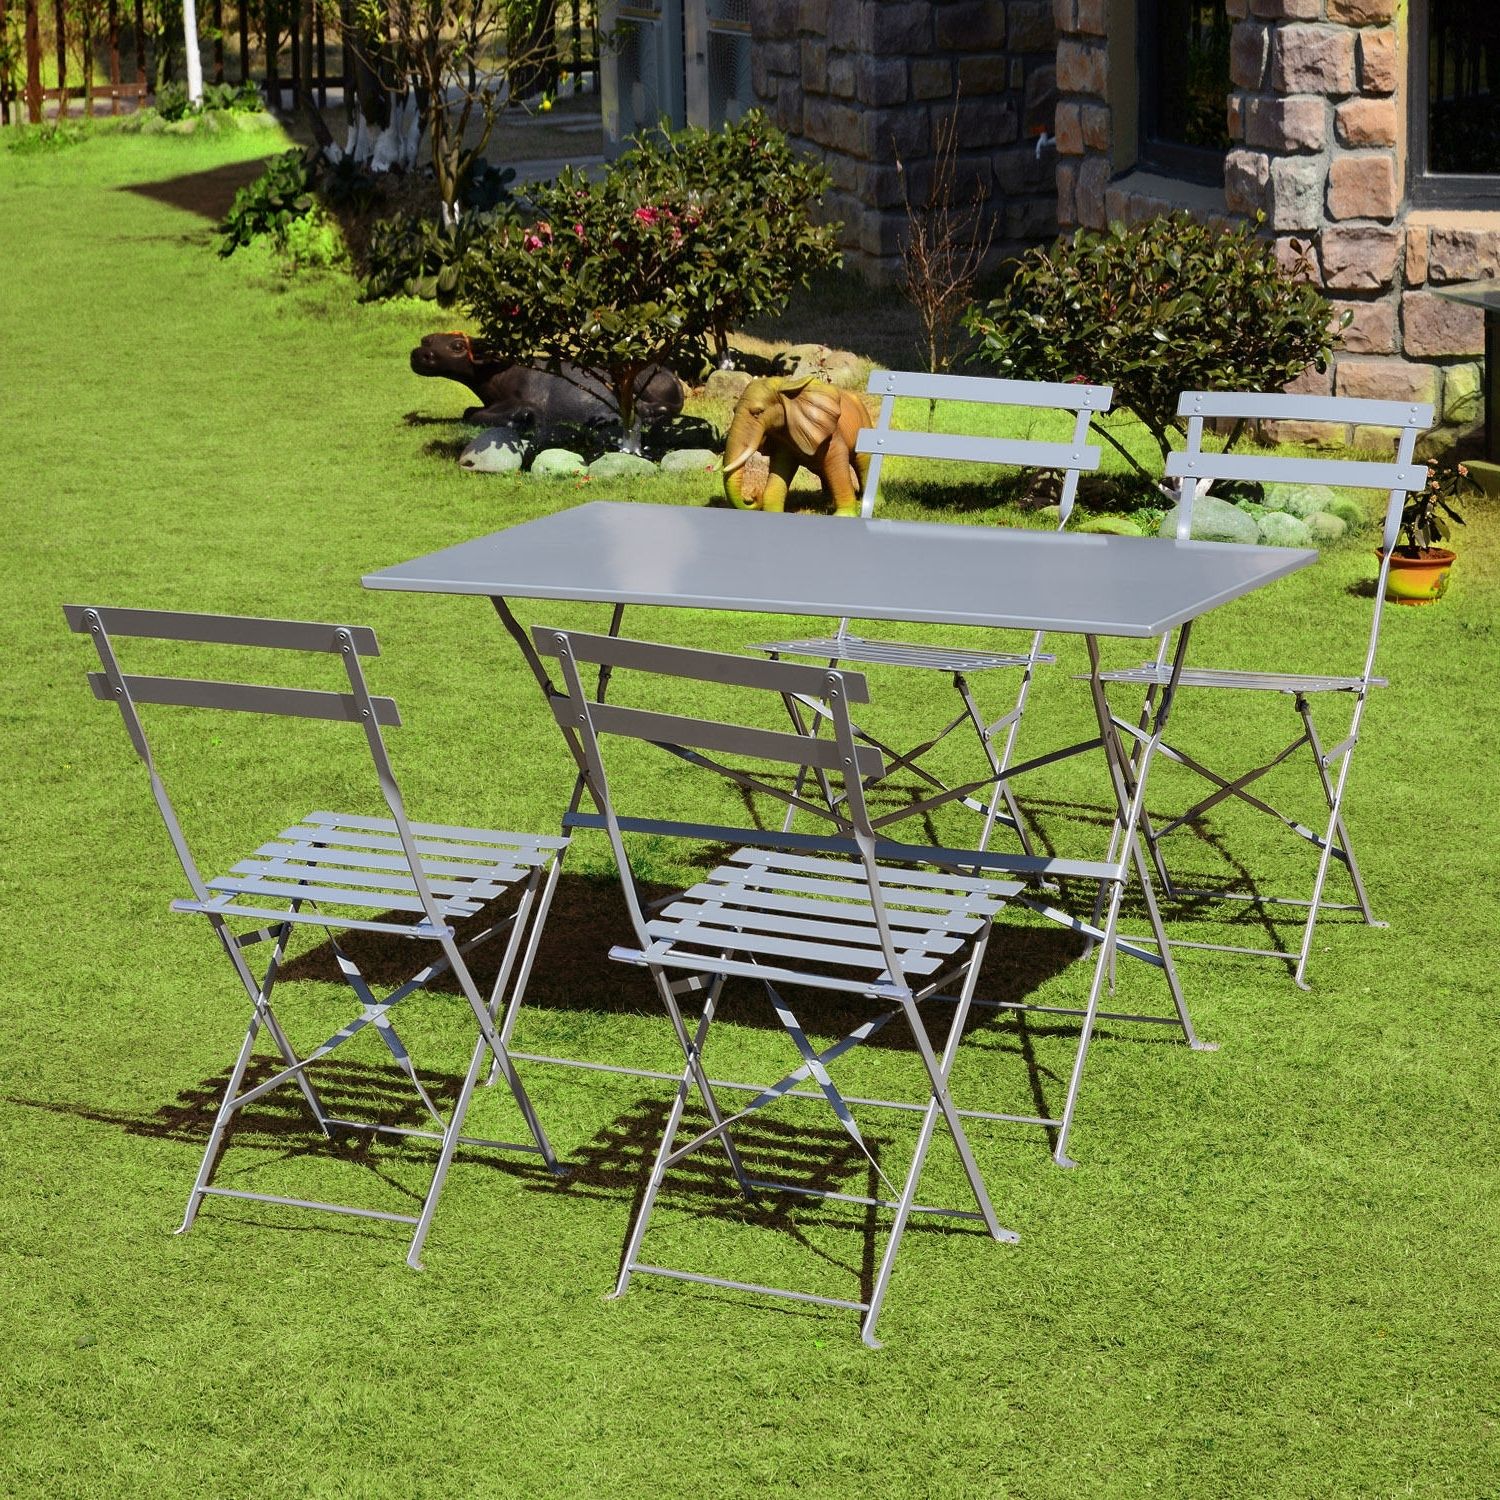 Latest Garden Dining Tables And Chairs With Regard To 5pc Outdoor Garden Furniture Set Patio Folding Dining Table Chairs (View 18 of 25)